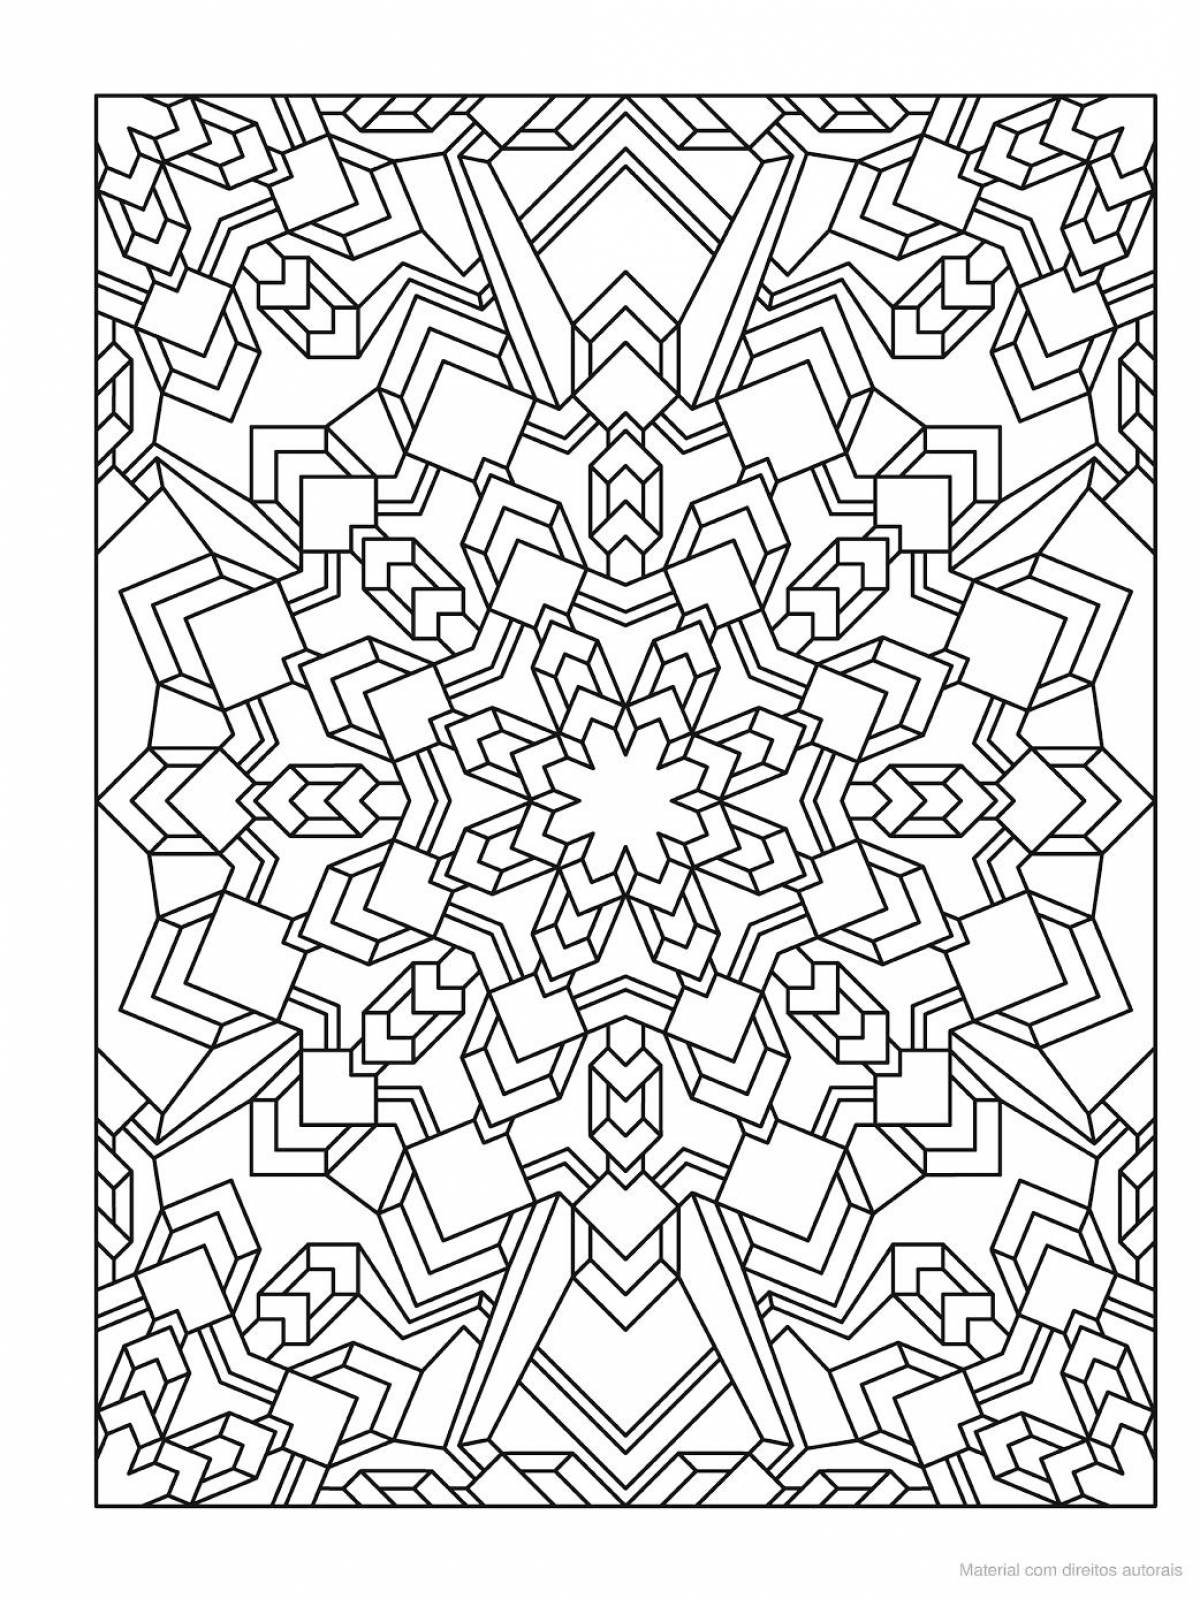 Refreshing soothing coloring pages